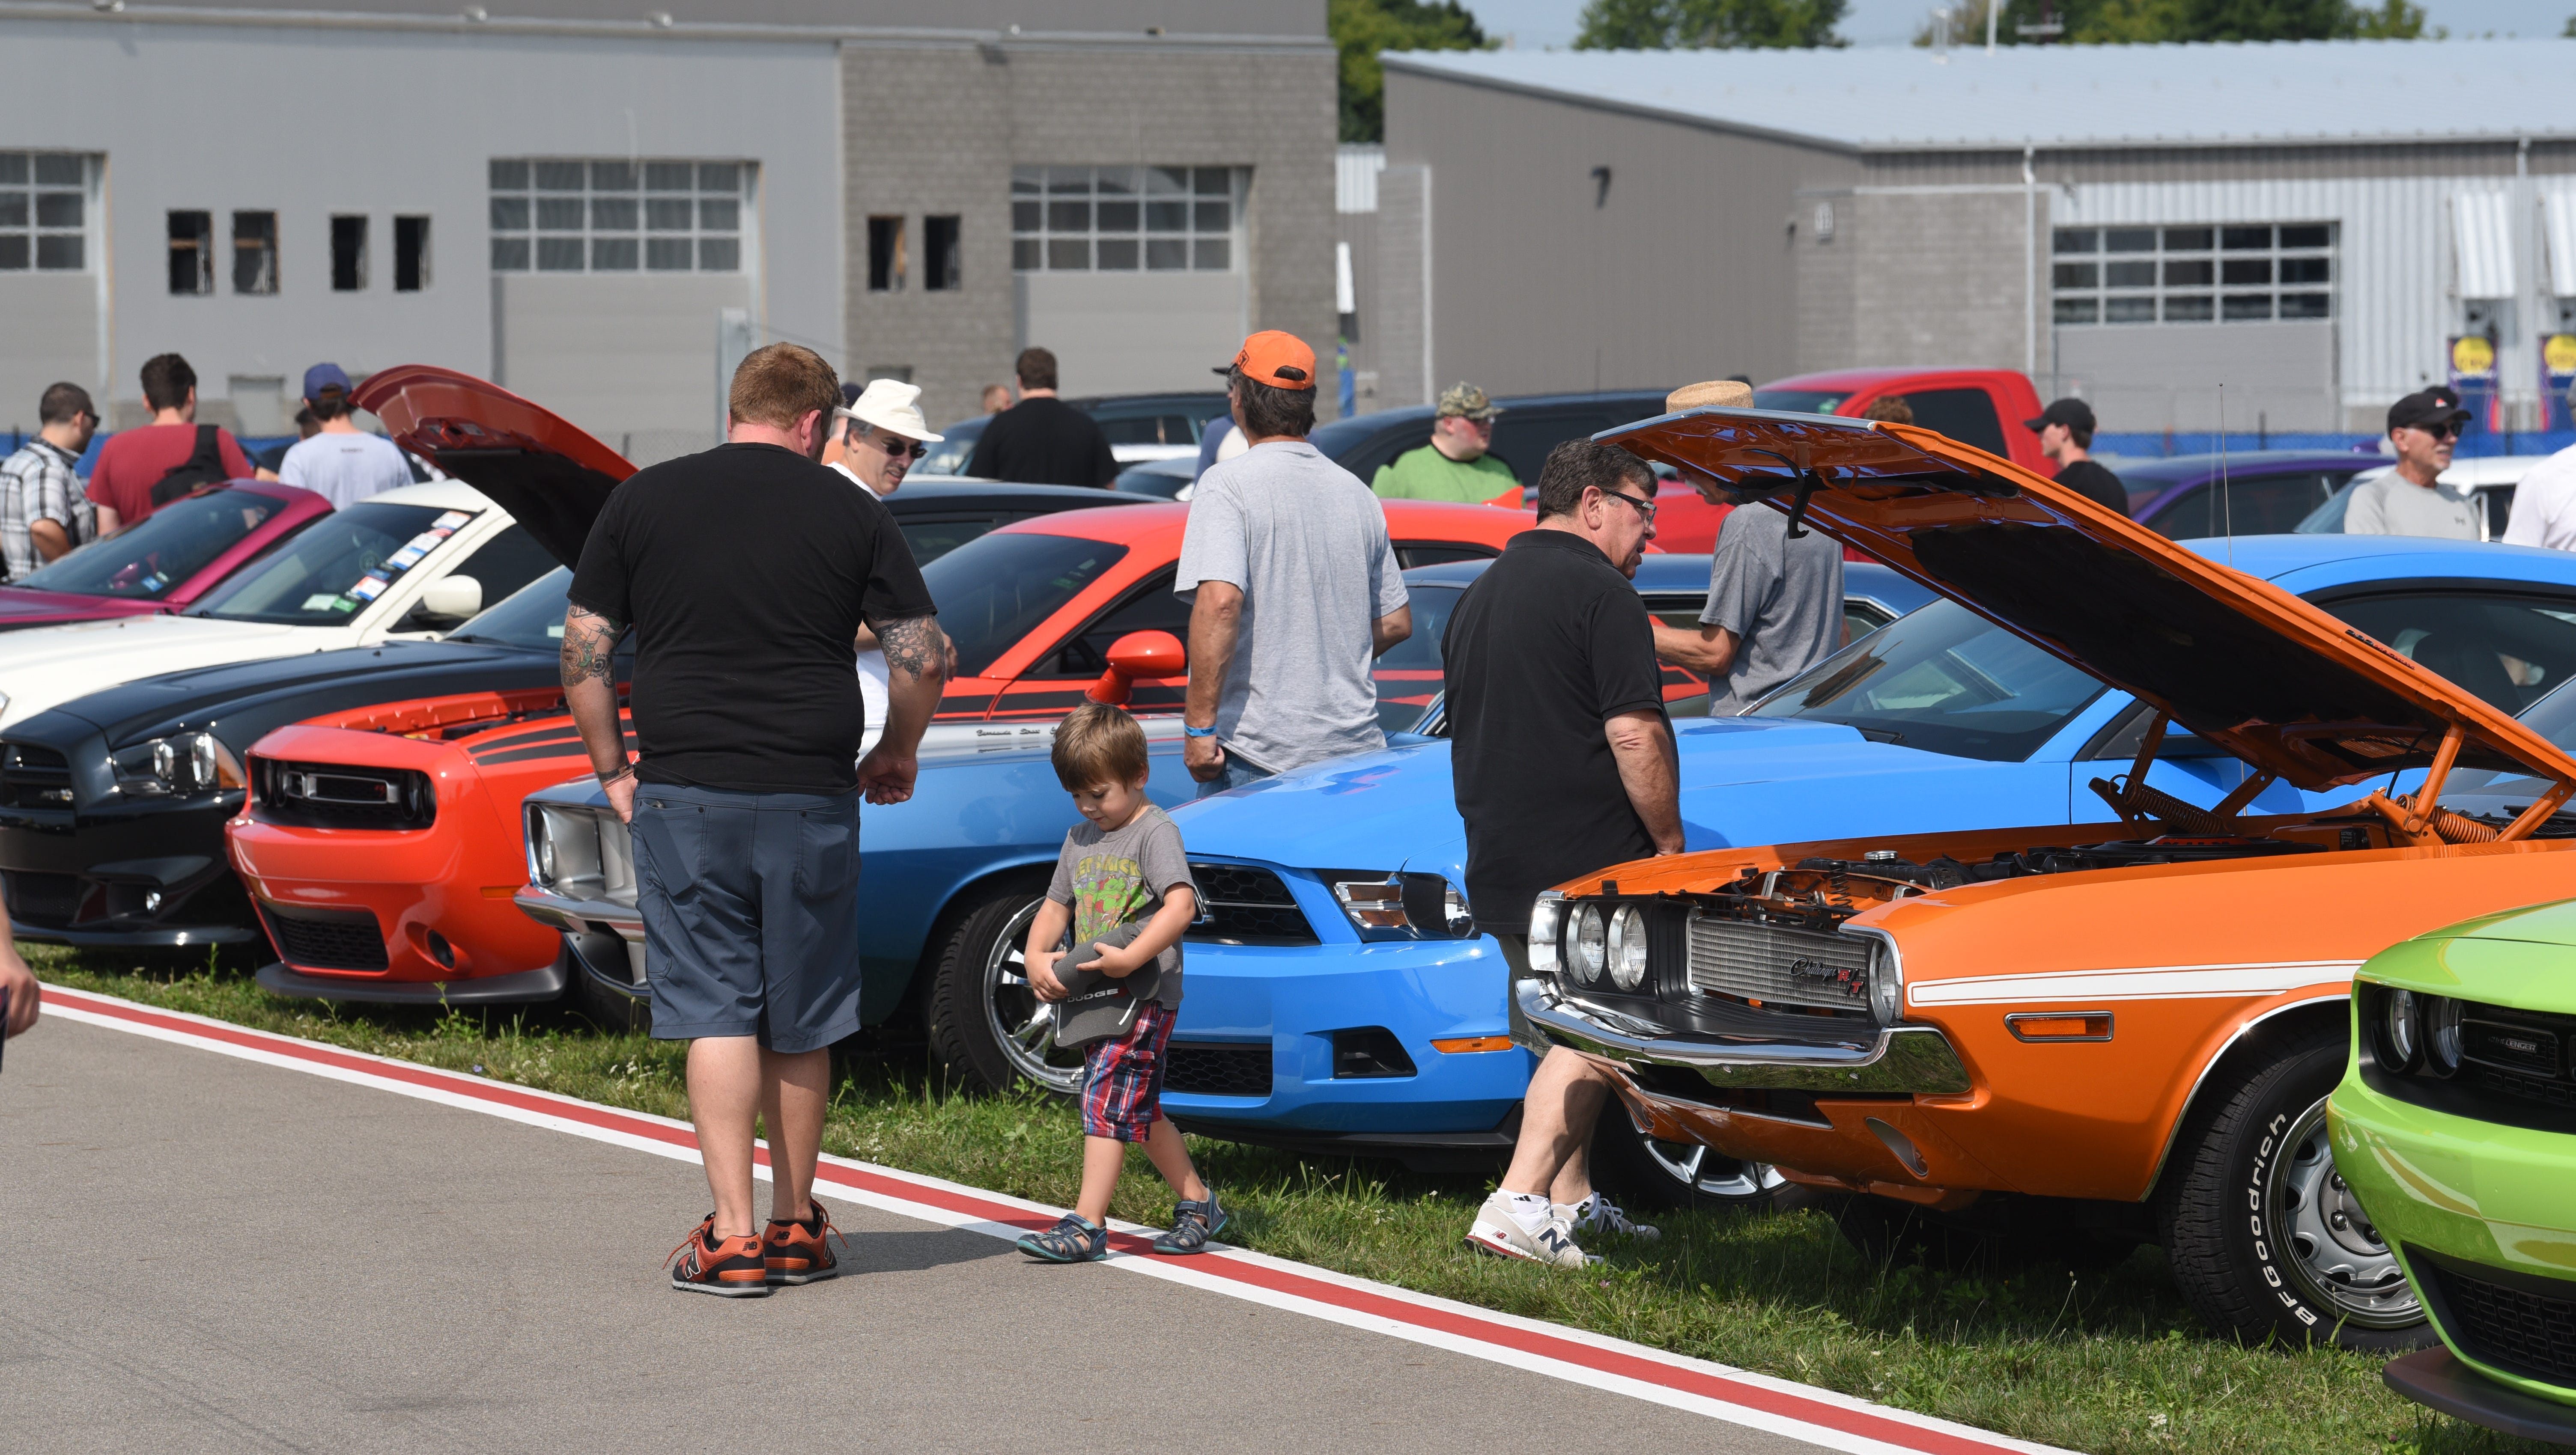 People enjoy the muscle cars on display during the Roadkill Nights event.